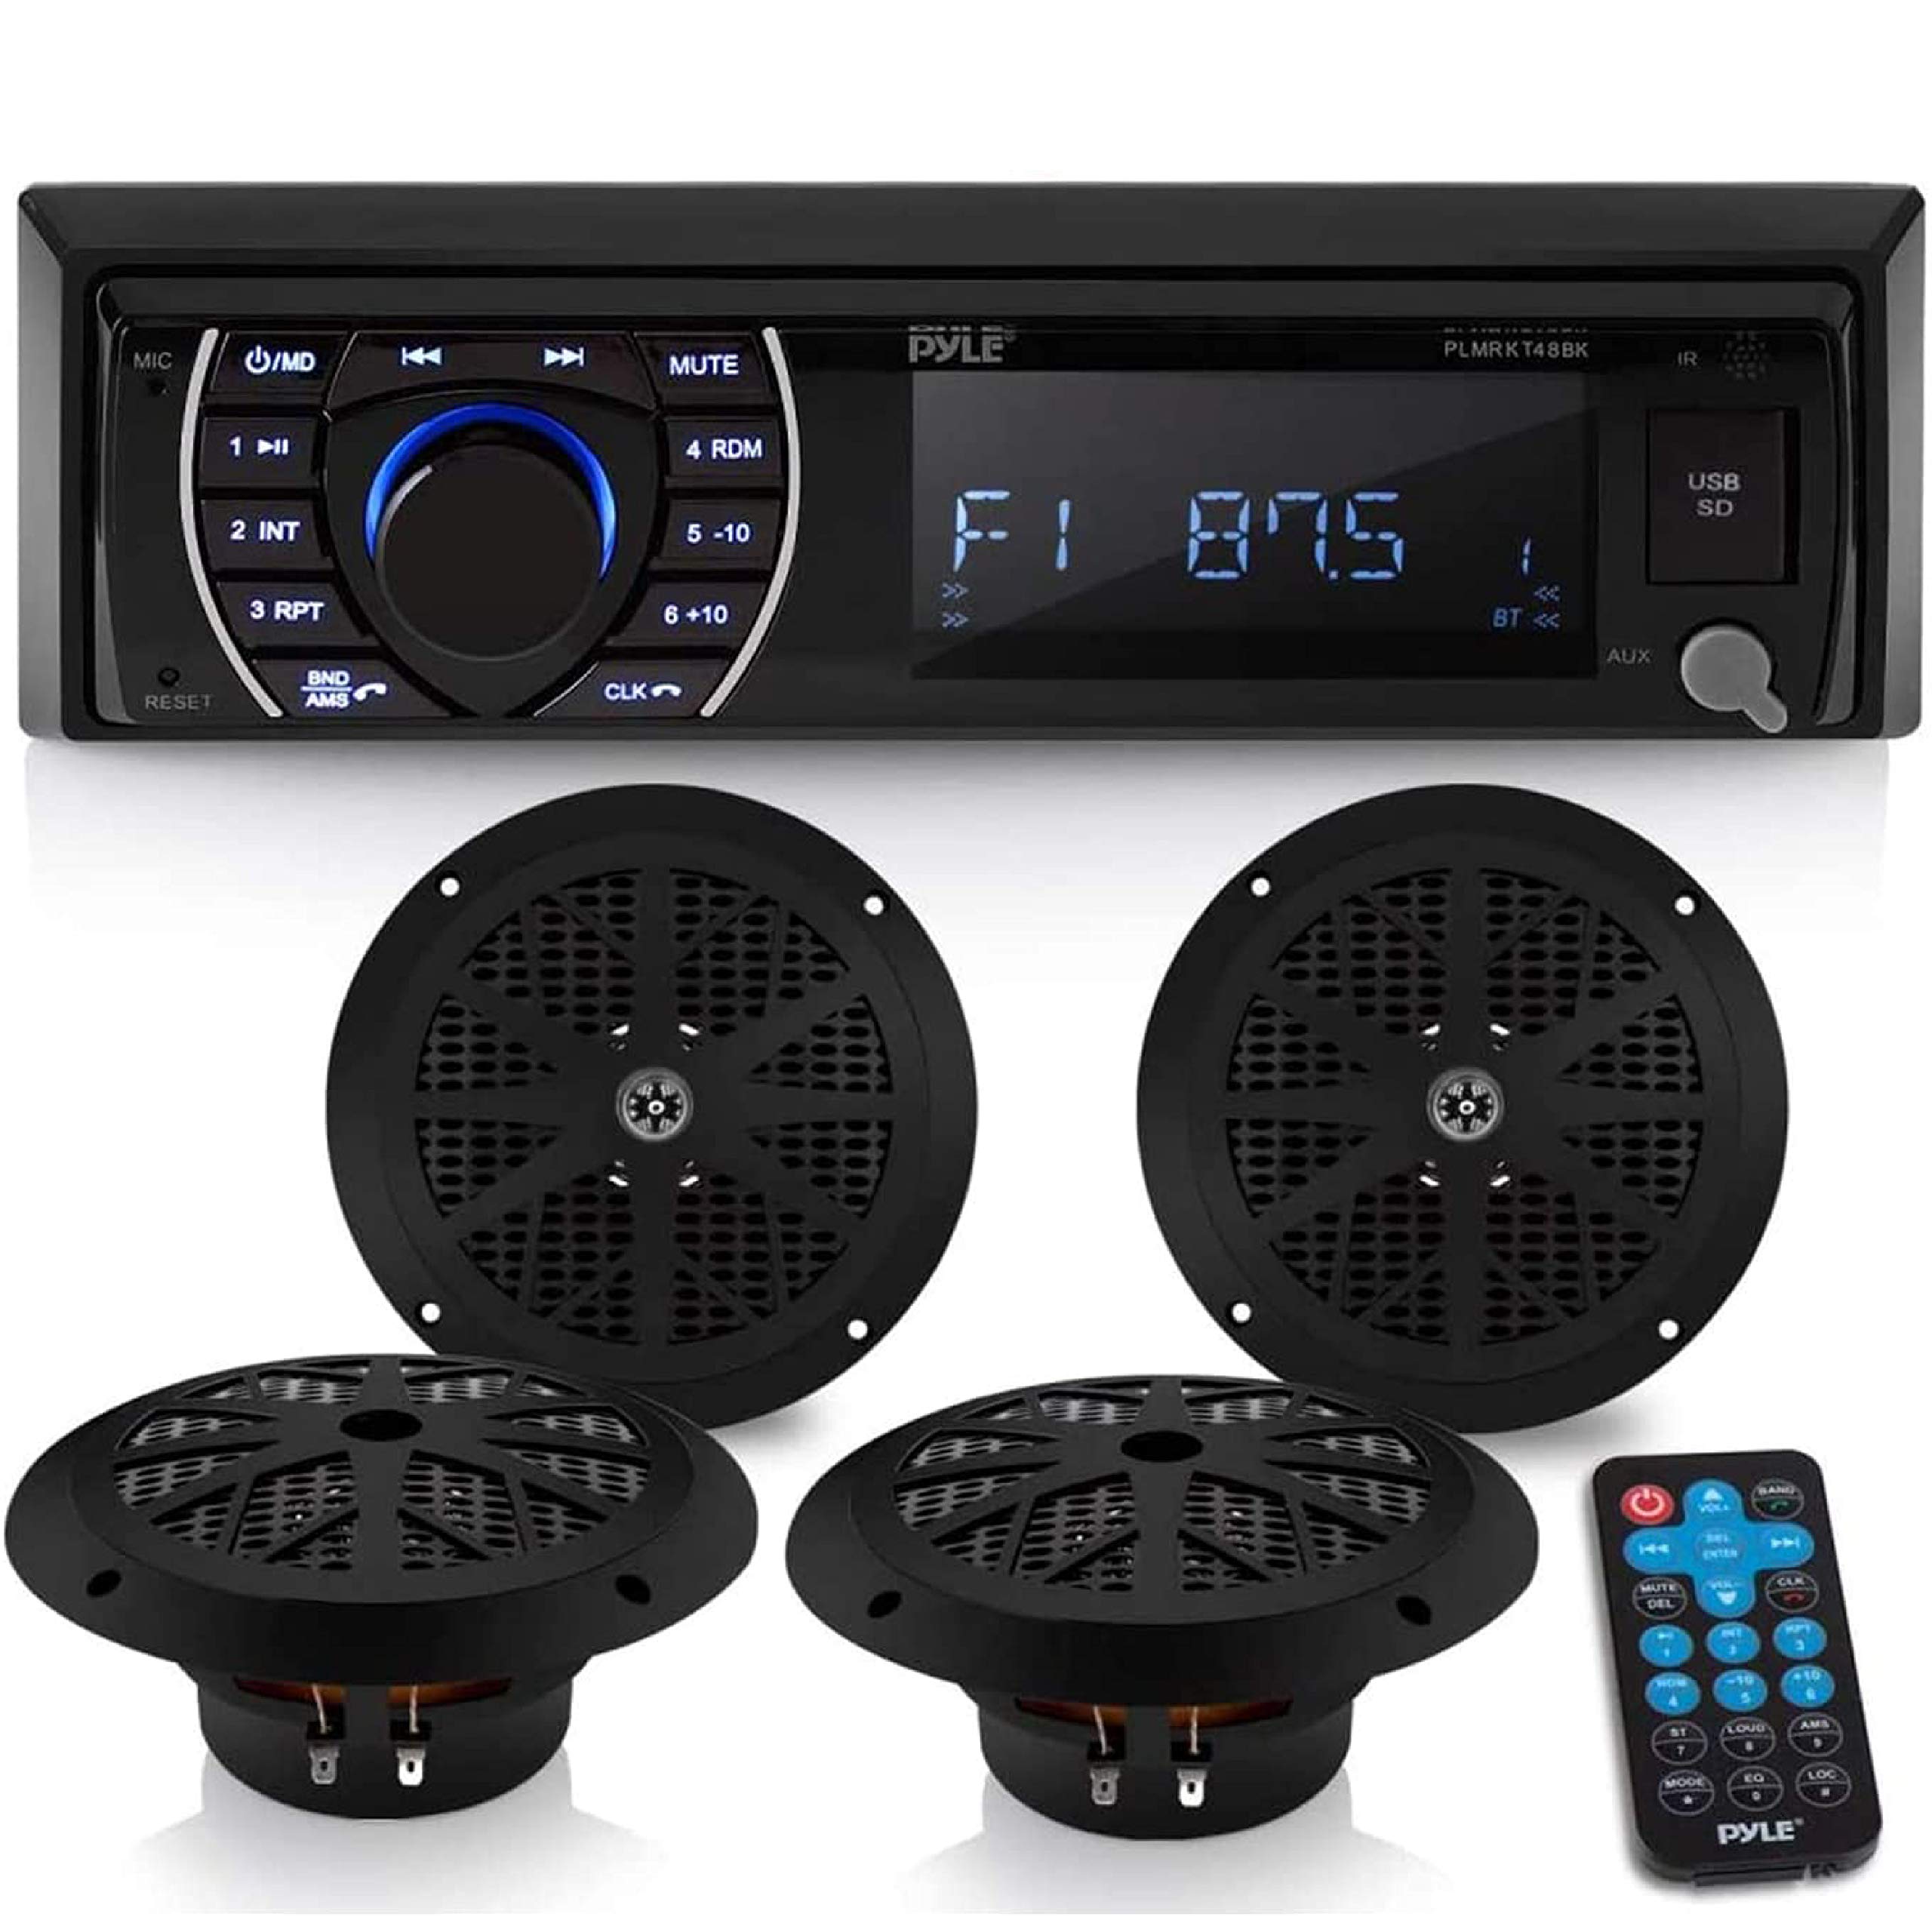 Pyle Marine Bluetooth Stereo Radio - 12v Single DIN Style Boat In dash  Radio Receiver System with Built-in Mic, Digital LCD, RCA, MP3, USB, SD, AM  FM